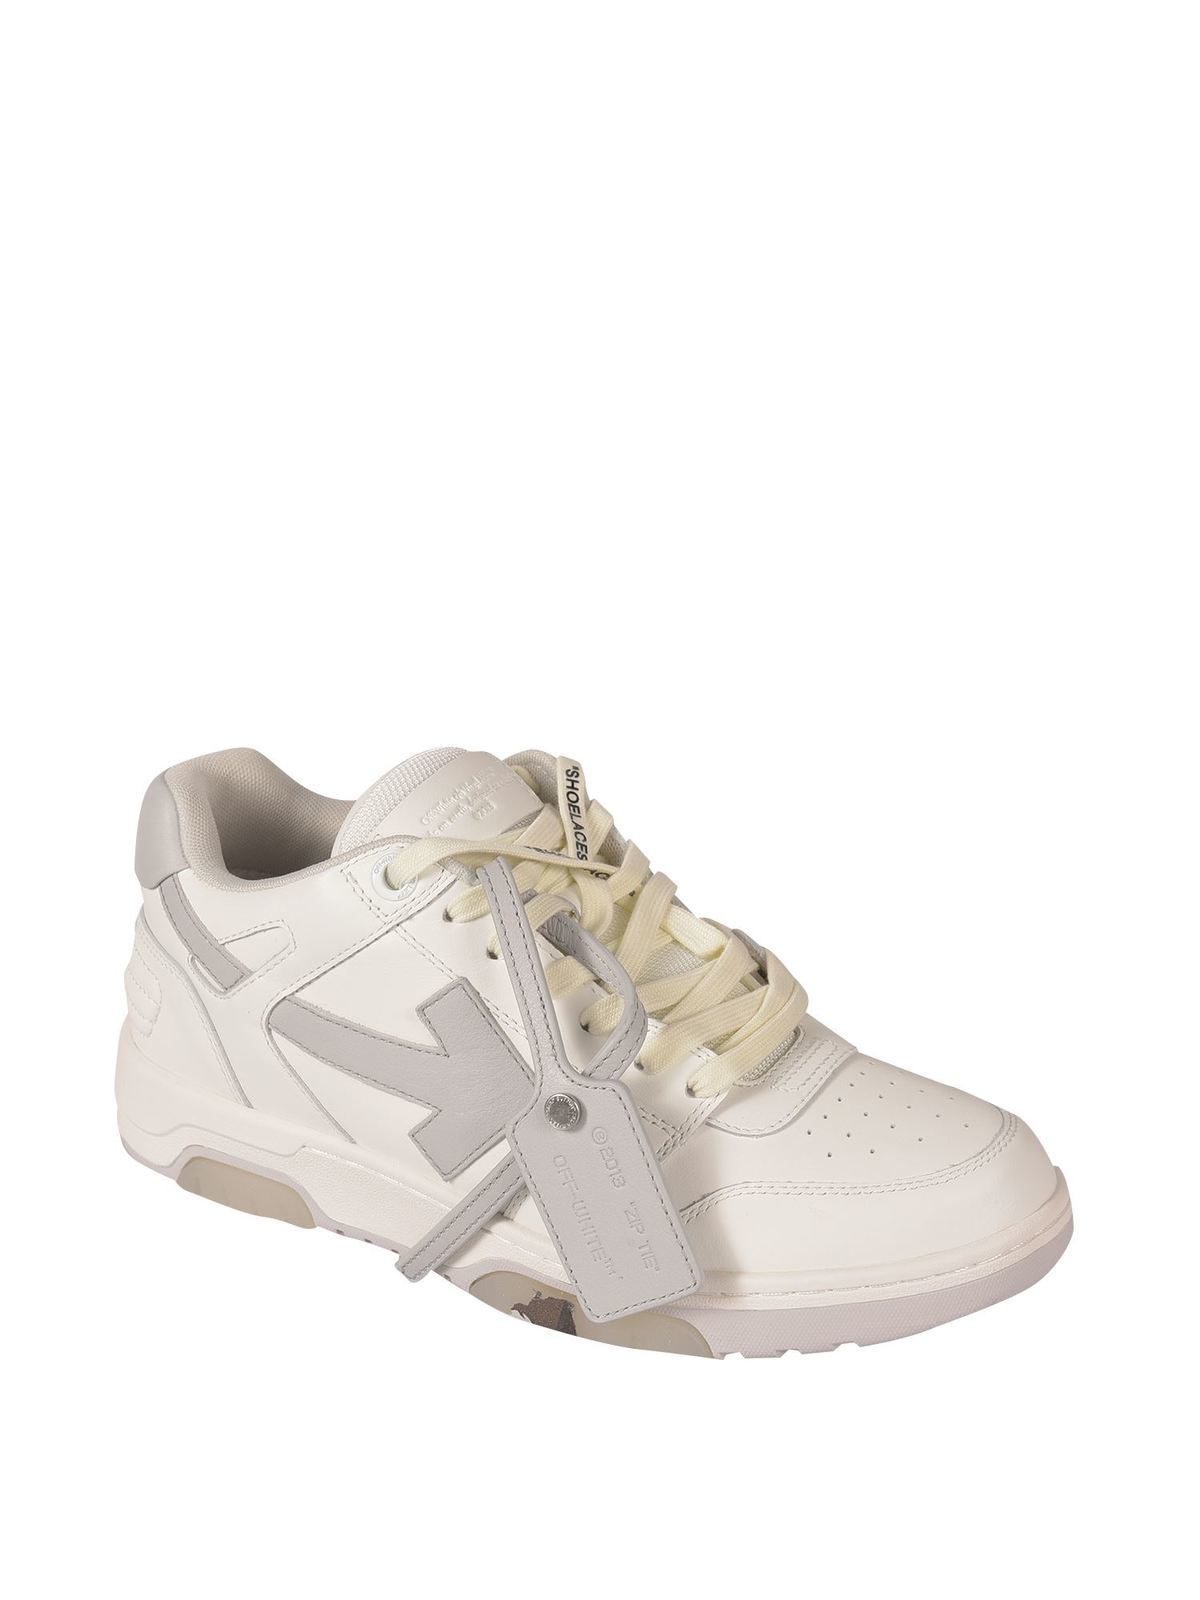 Trainers Off-White - Out Of Office sneakers in white and gray ...